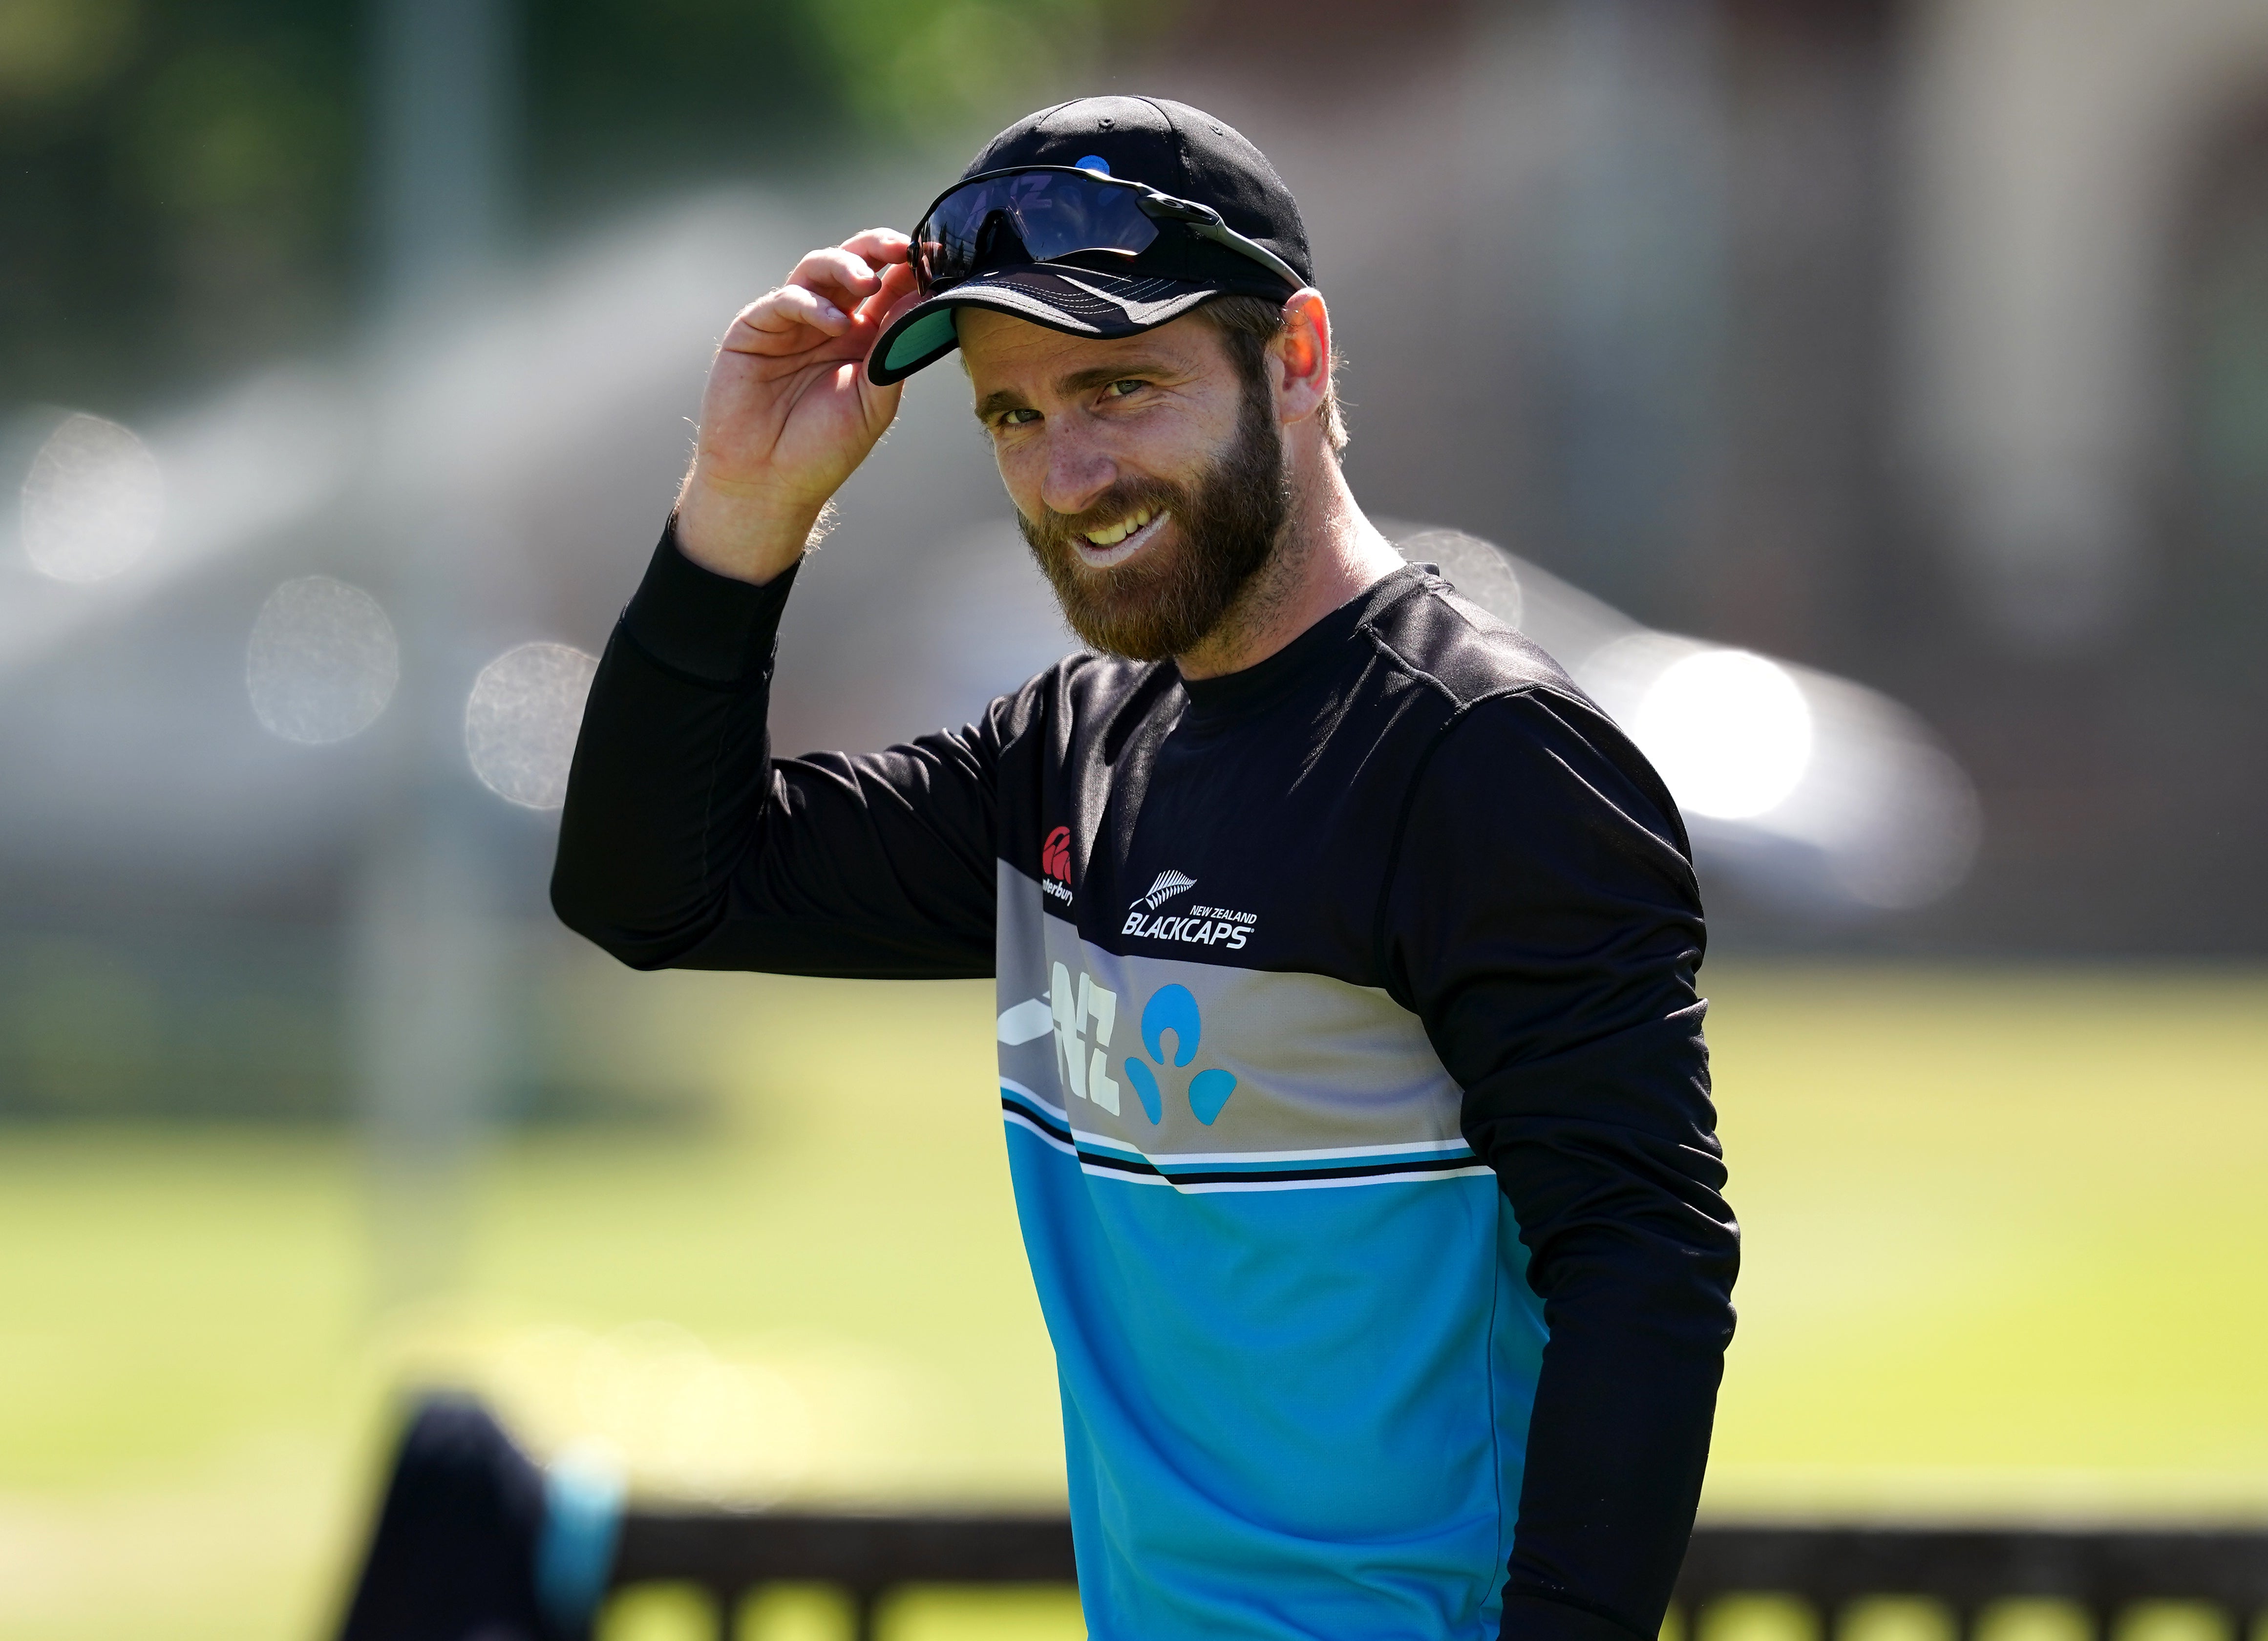 T20 World Cup 2021: "There's a chance that Kane Williamson might skip a few matches" - NZ coach Gary Stead